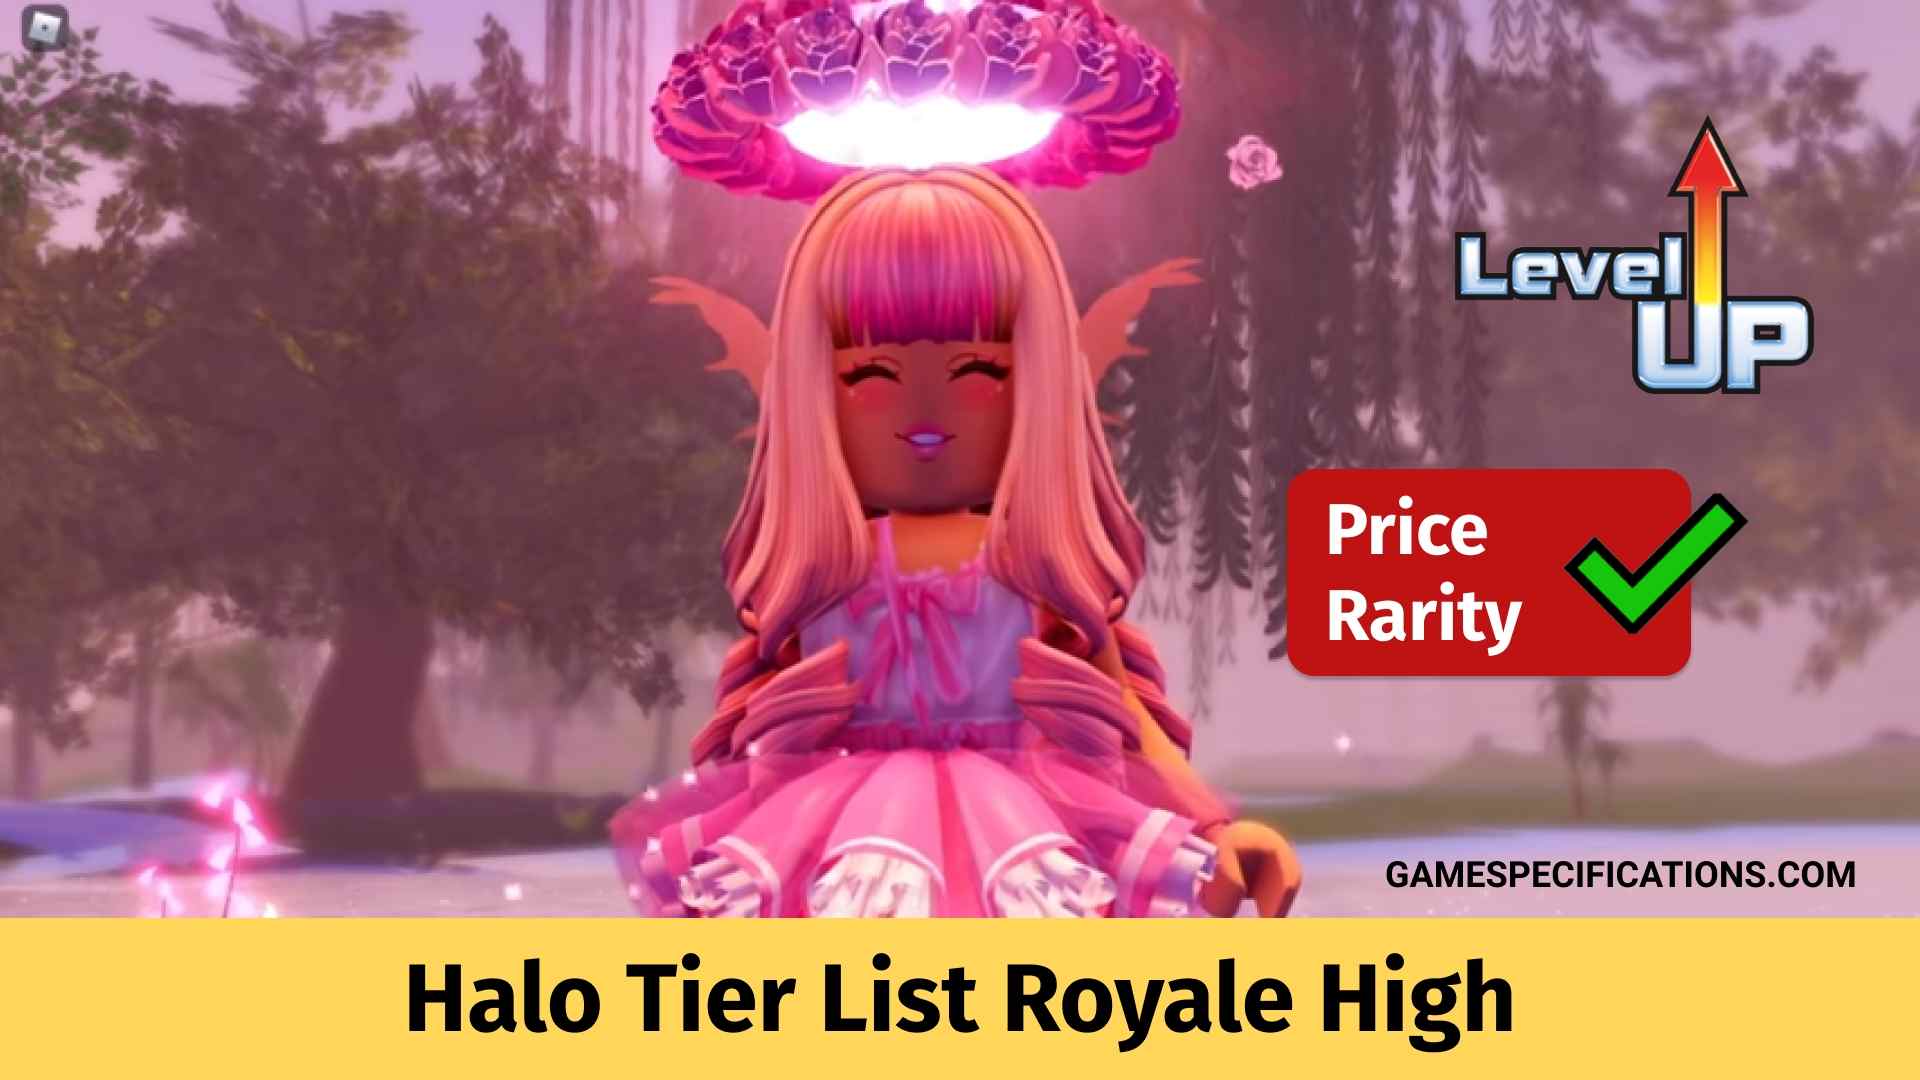 Top Halo Tier List Royale High Based On Rarity 2021 Game Specifications - roblox royal high summer halo